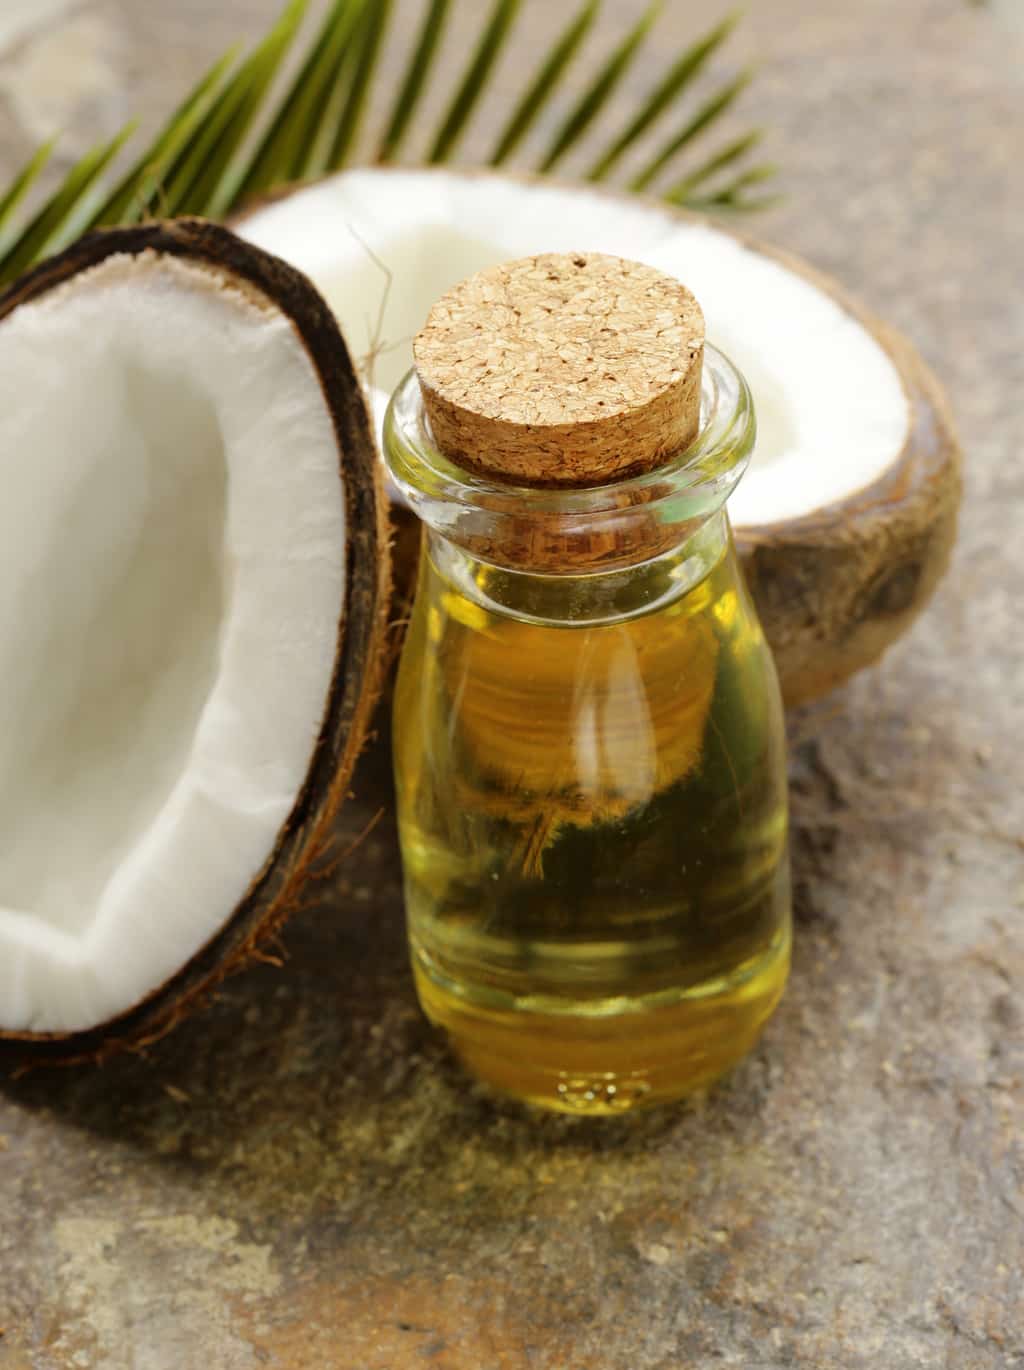 Coconut Oil Does Not Cause Cardiovascular Disease